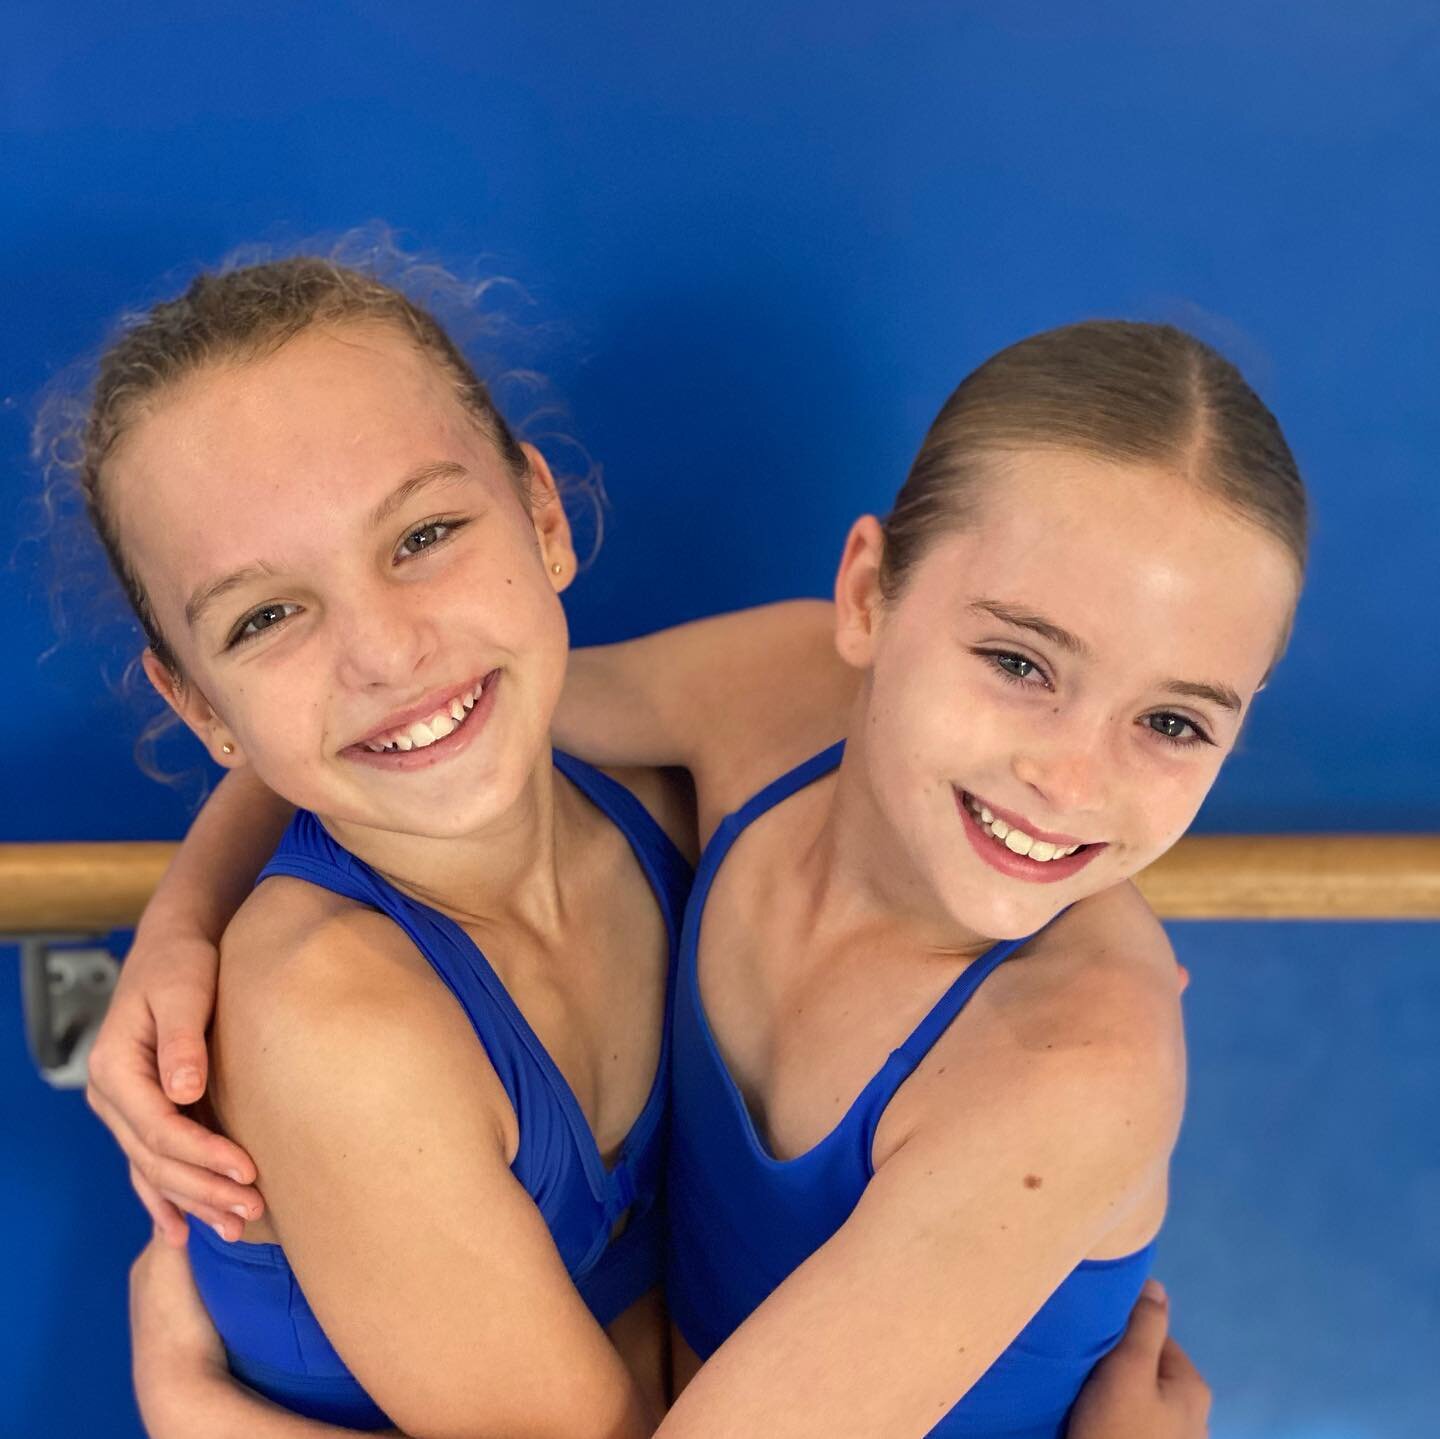 Monday morning privates with my Milas/Millas 🤩💙 #madancers #charlysangel #goMAD #MADteam #passion #dance #strength #power #unity #lyrical #contemporary #hope #teamworkmakesthedreamwork #dancecommunity #community #northernbeaches  #brookvale #dancef